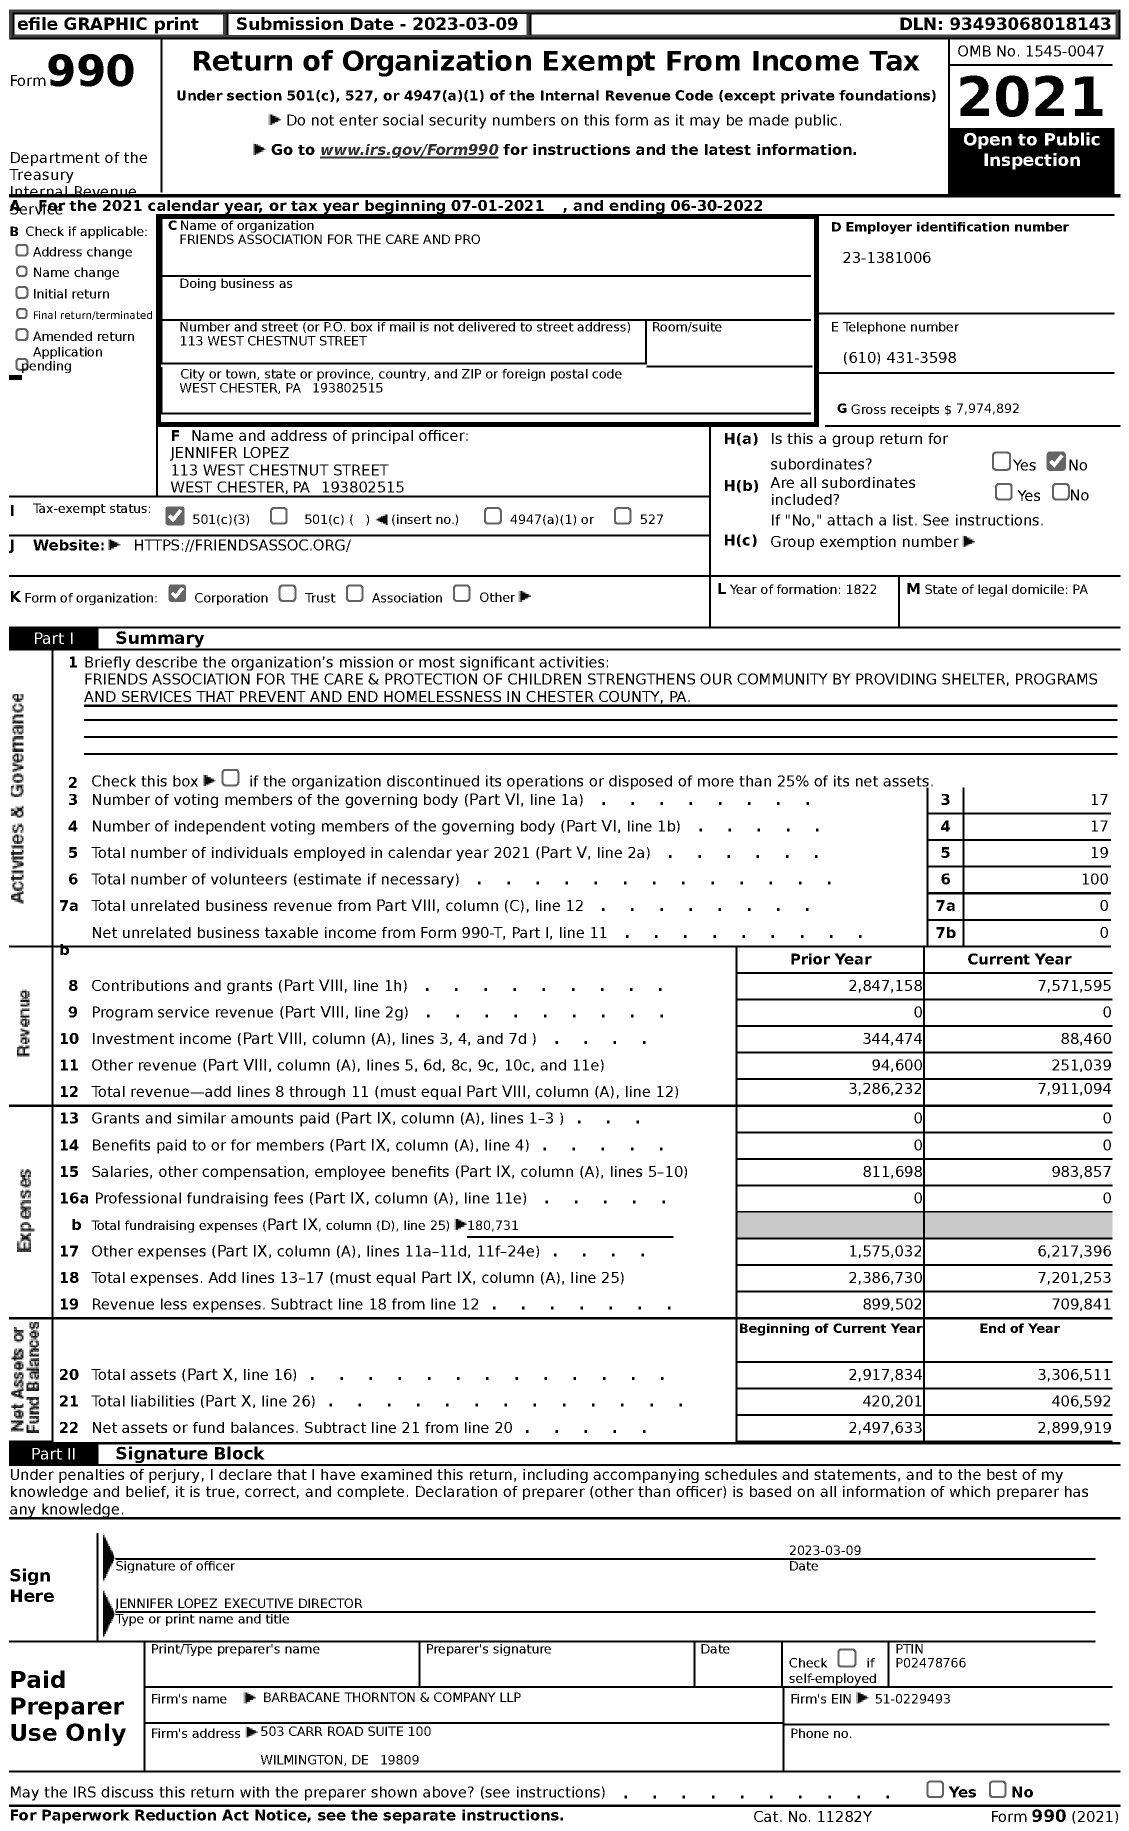 Image of first page of 2021 Form 990 for Friends Association for the Care and Pro